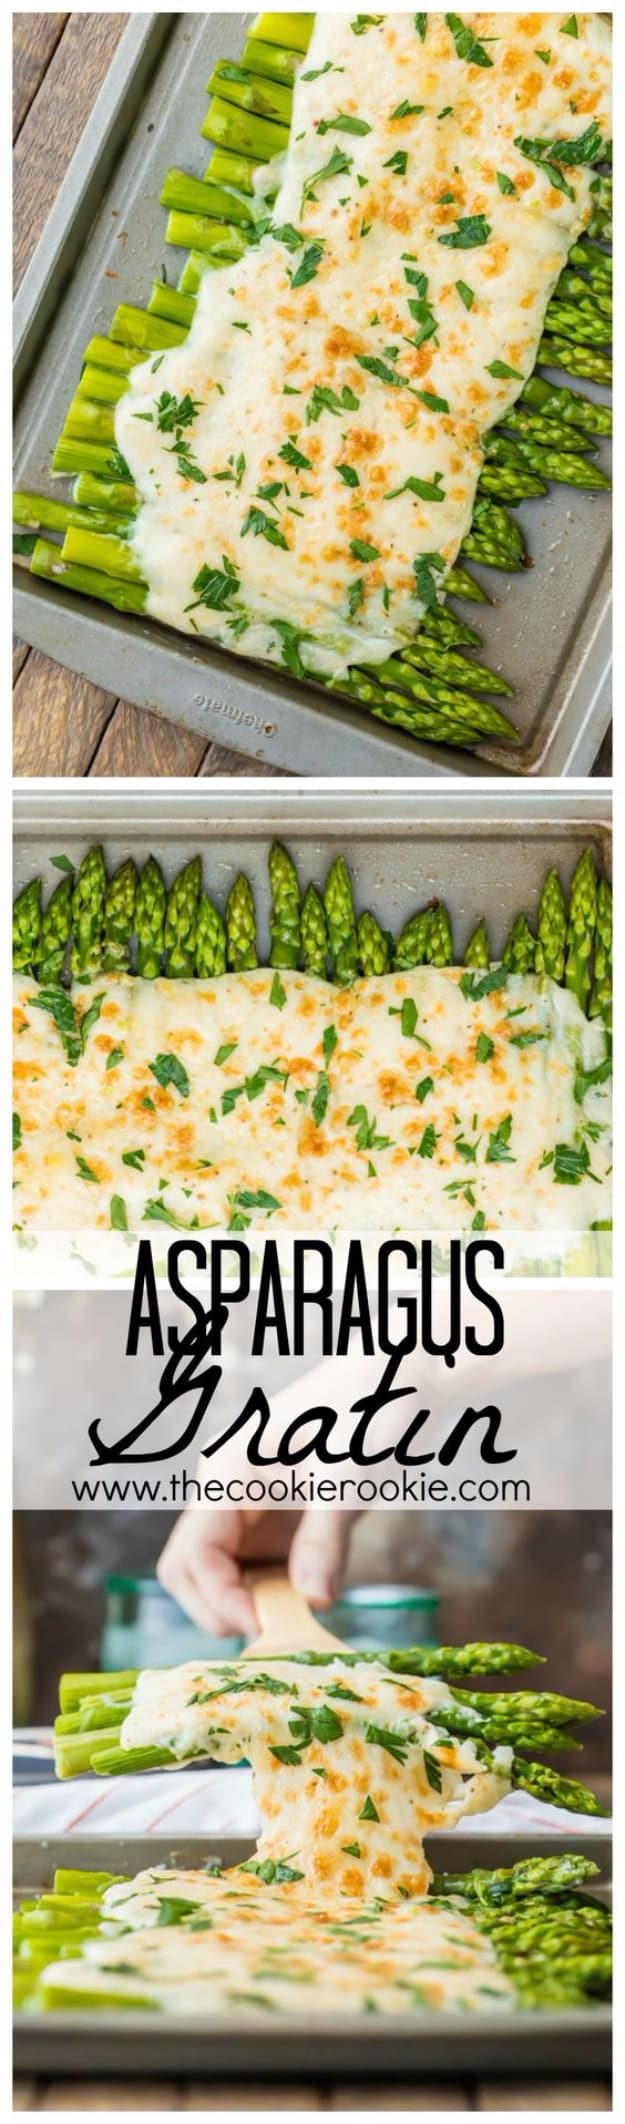 Easy Thanksgiving Recipes - Three Cheese Asparagus Gratin - Best Simple and Quick Recipe Ideas for Thanksgiving Dinner. Cranberries, Turkey, Gravy, Sauces, Sides, Vegetables, Dips and Desserts - DIY Cooking Tutorials With Step by Step Instructions - Ideas for A Crowd, Parties and Last Minute Recipes 